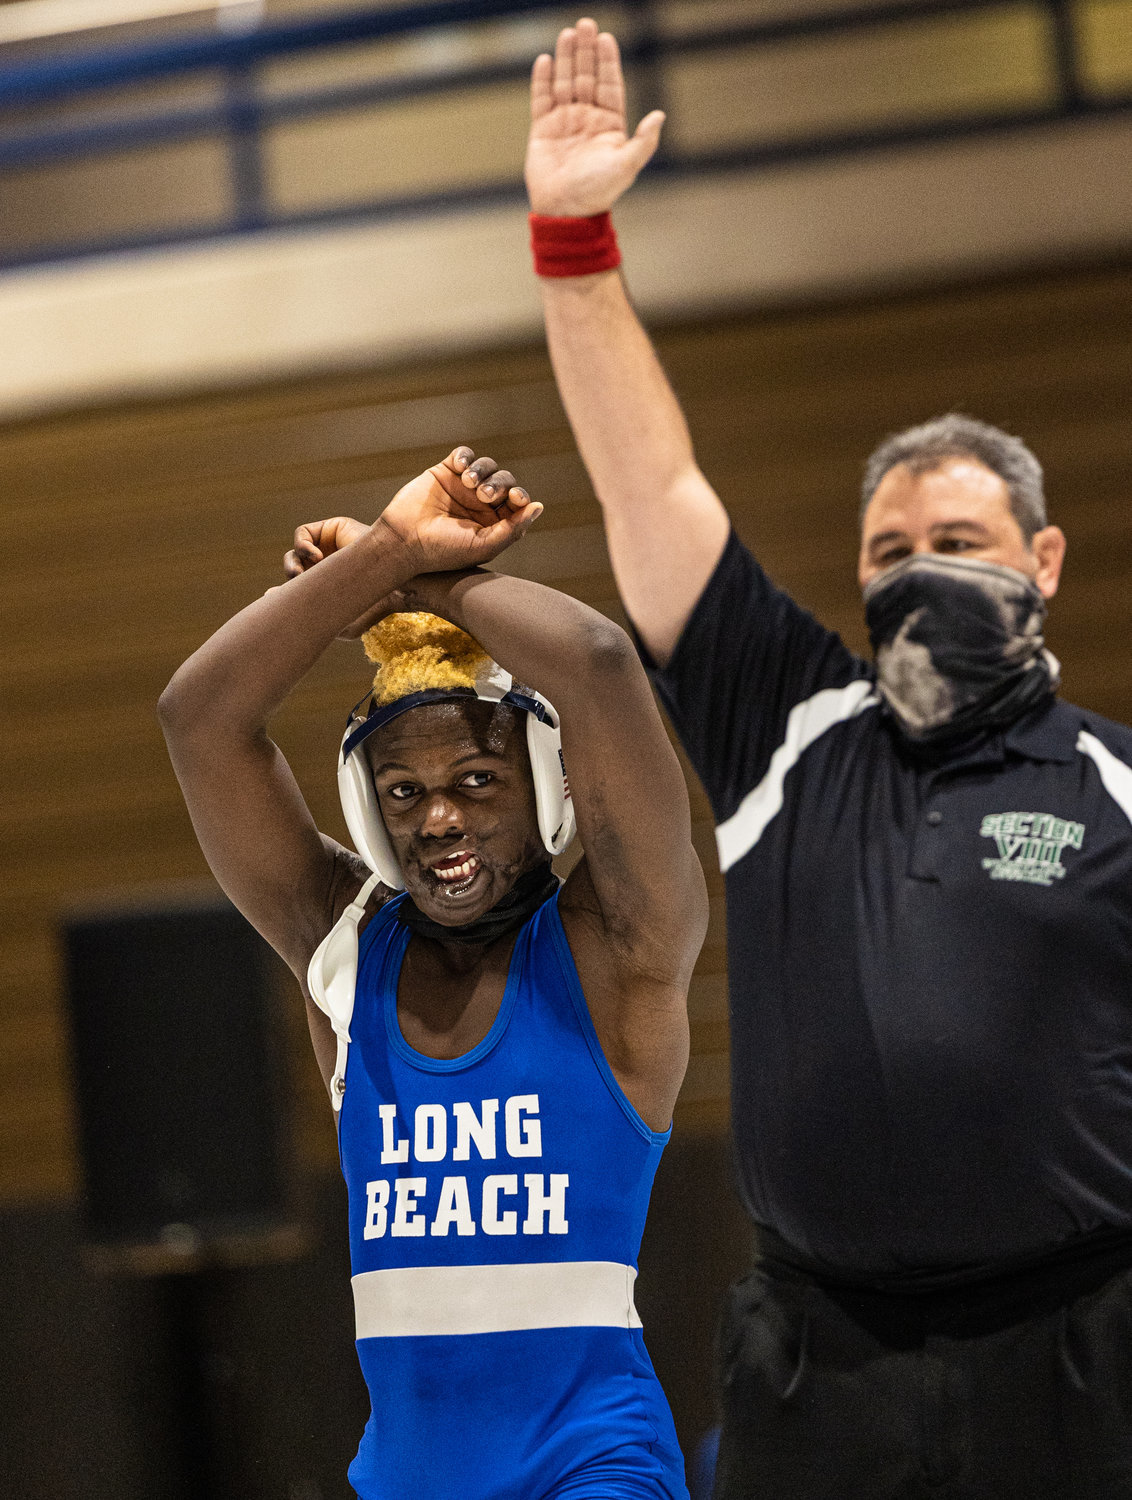 Long Beach eighth-grader Dunia Sibomana captured the Nassau County Division ! wrestling championship in the 102-pound weight class. The story on Sibomana's journey earned sports editor Tony Bellissimo a top state award from the New York Press Association.